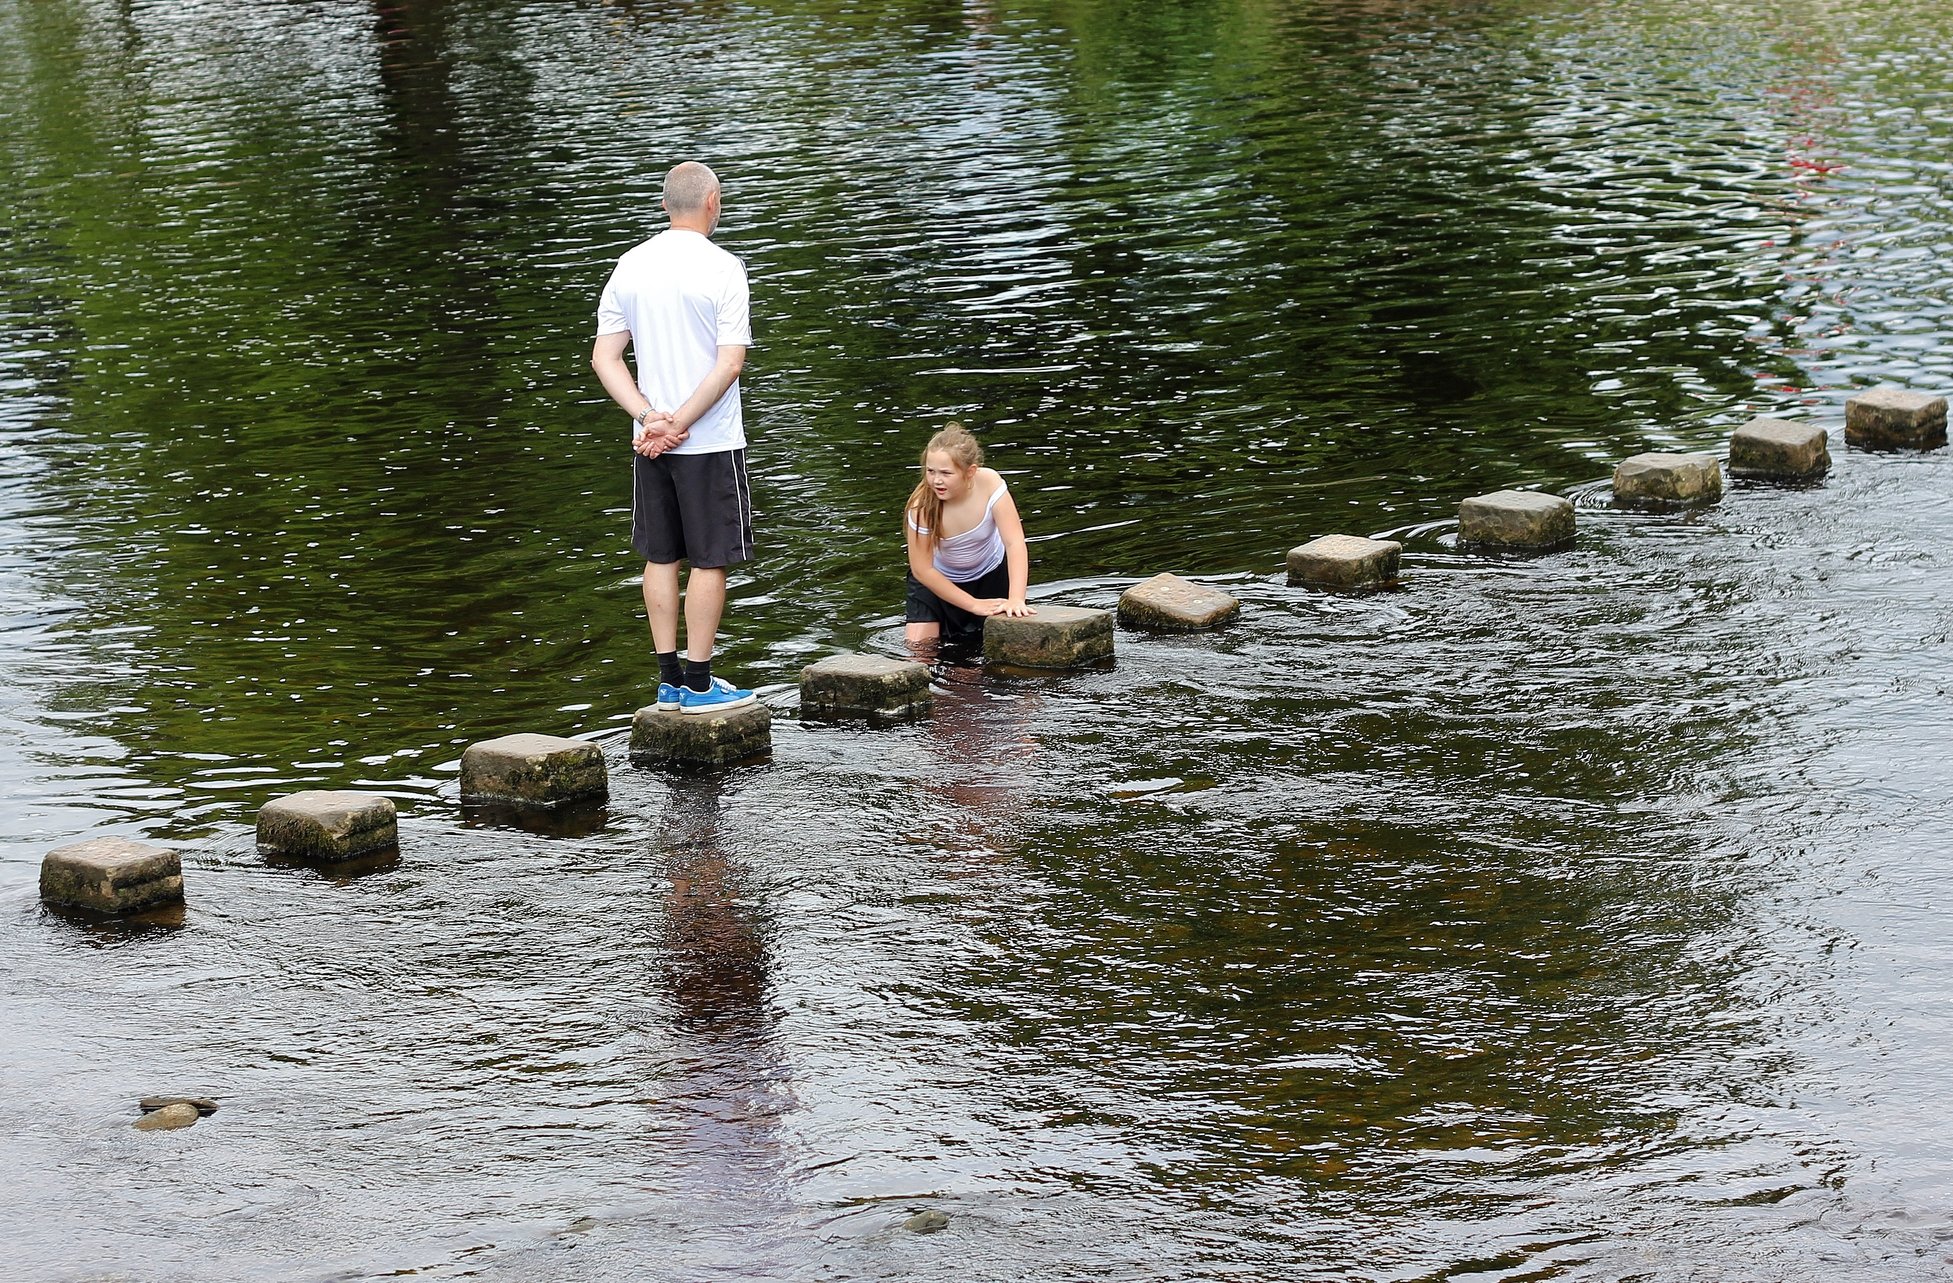 Bolton Abbey, Stepping stones